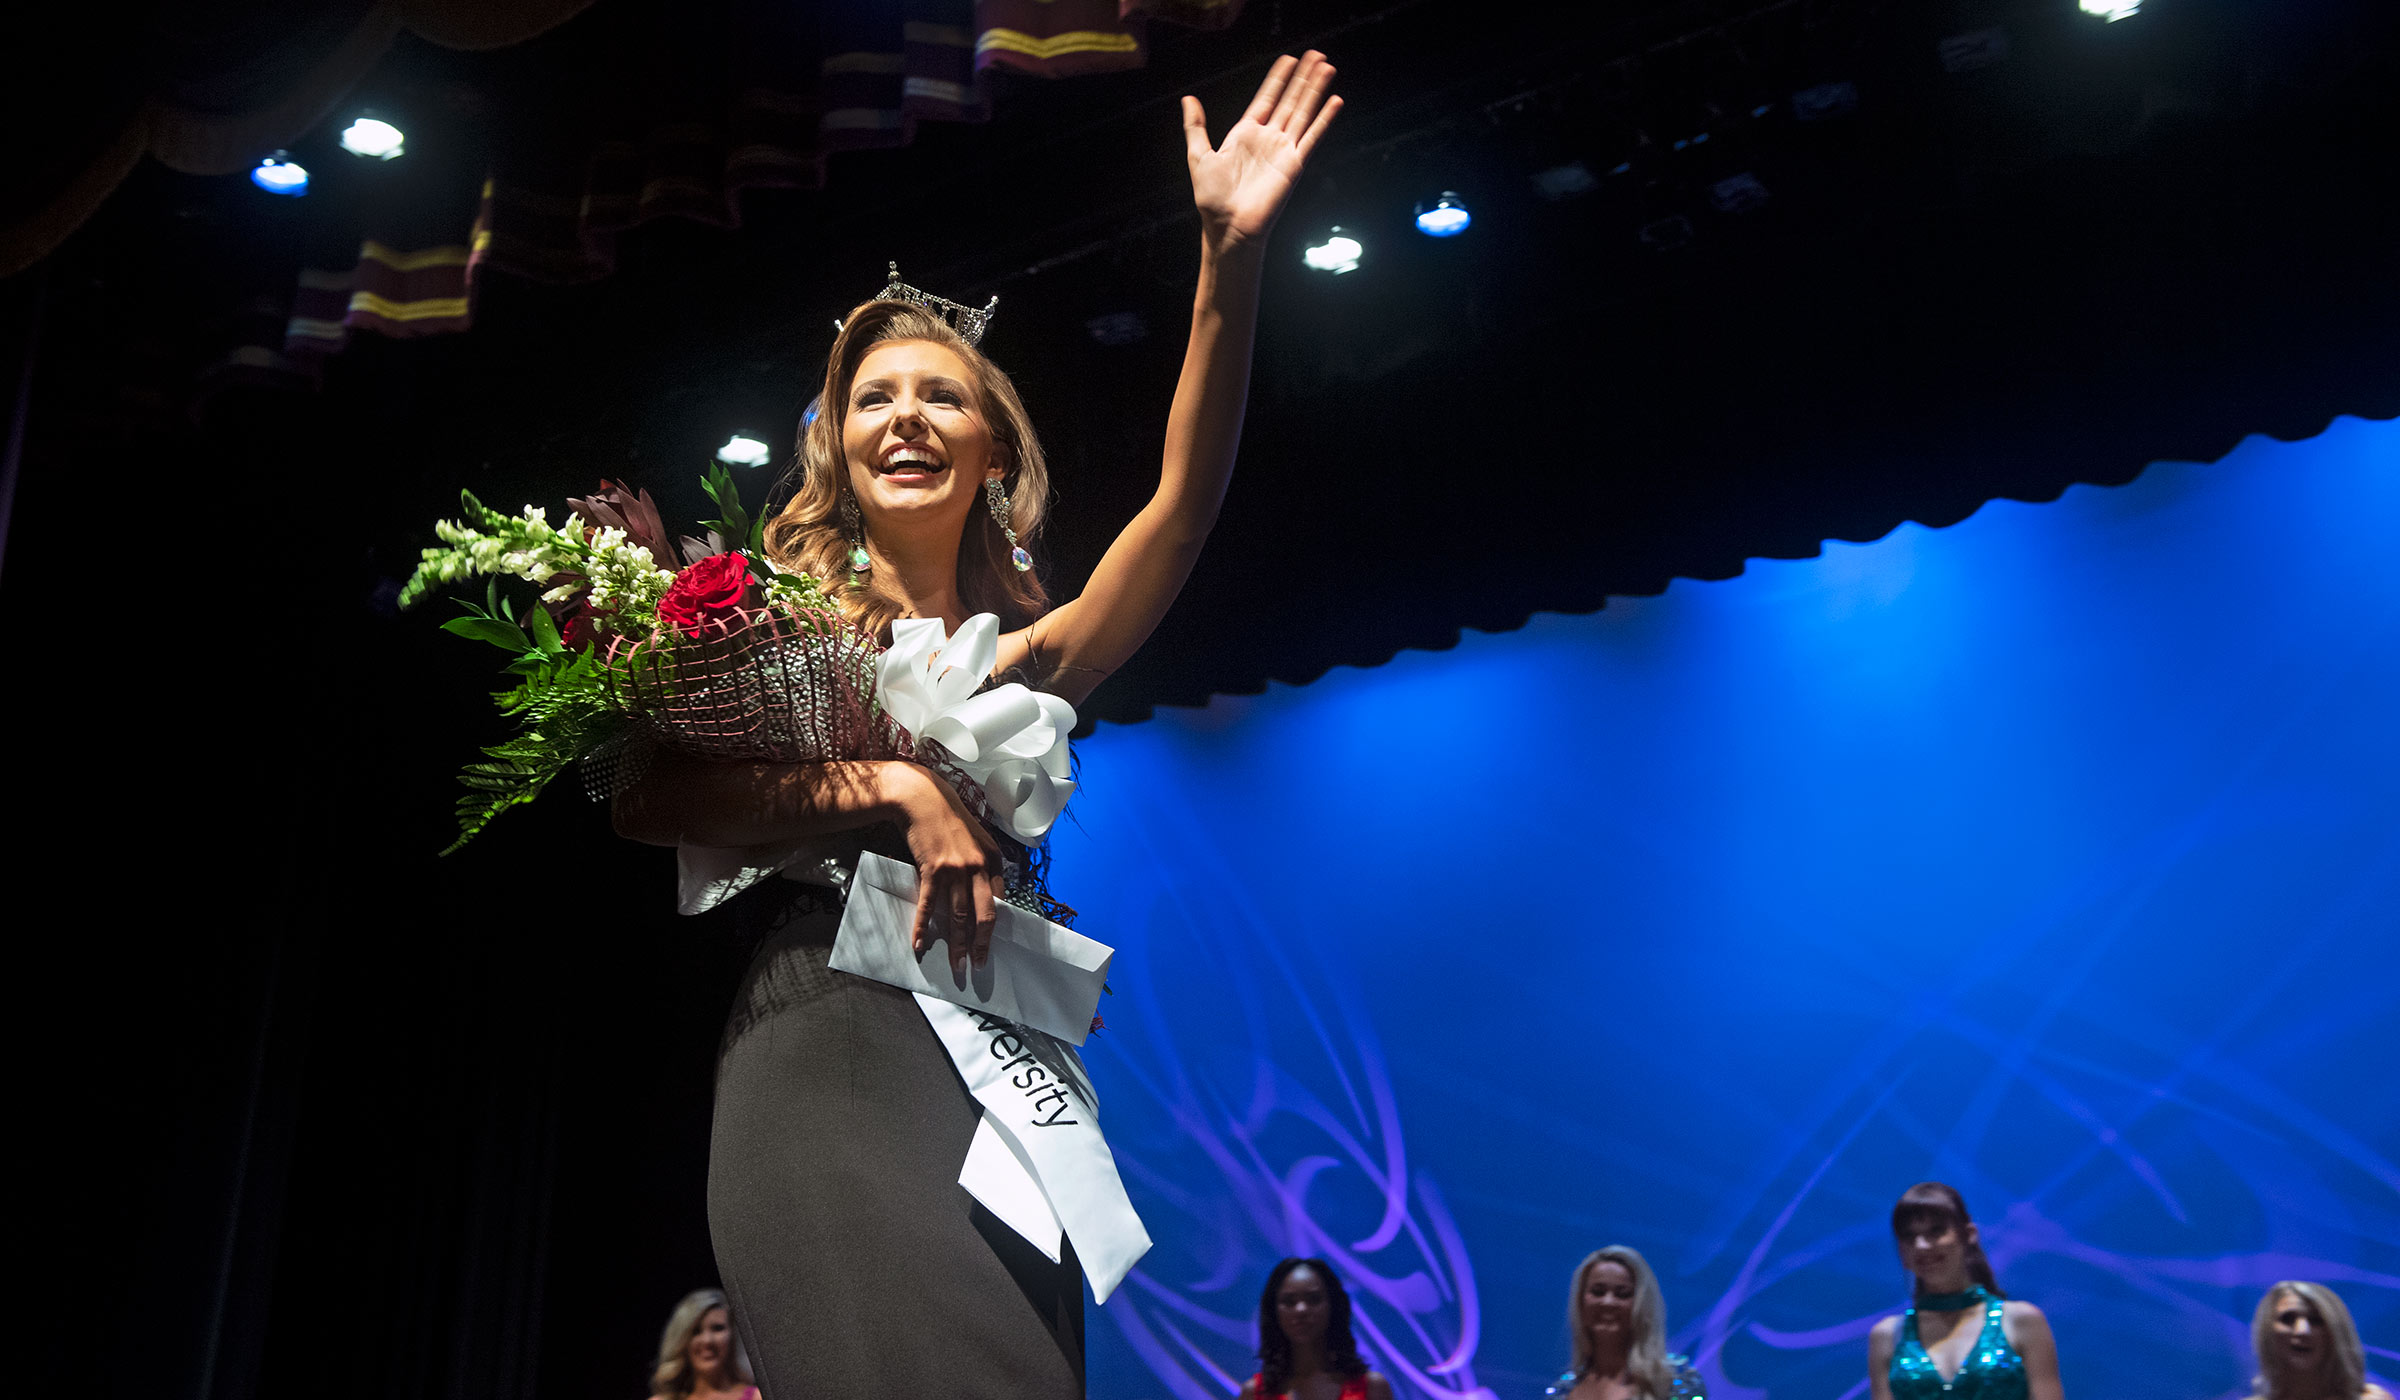 Female student in black evening gown with white sash, roses and crown waving at crowd from stage